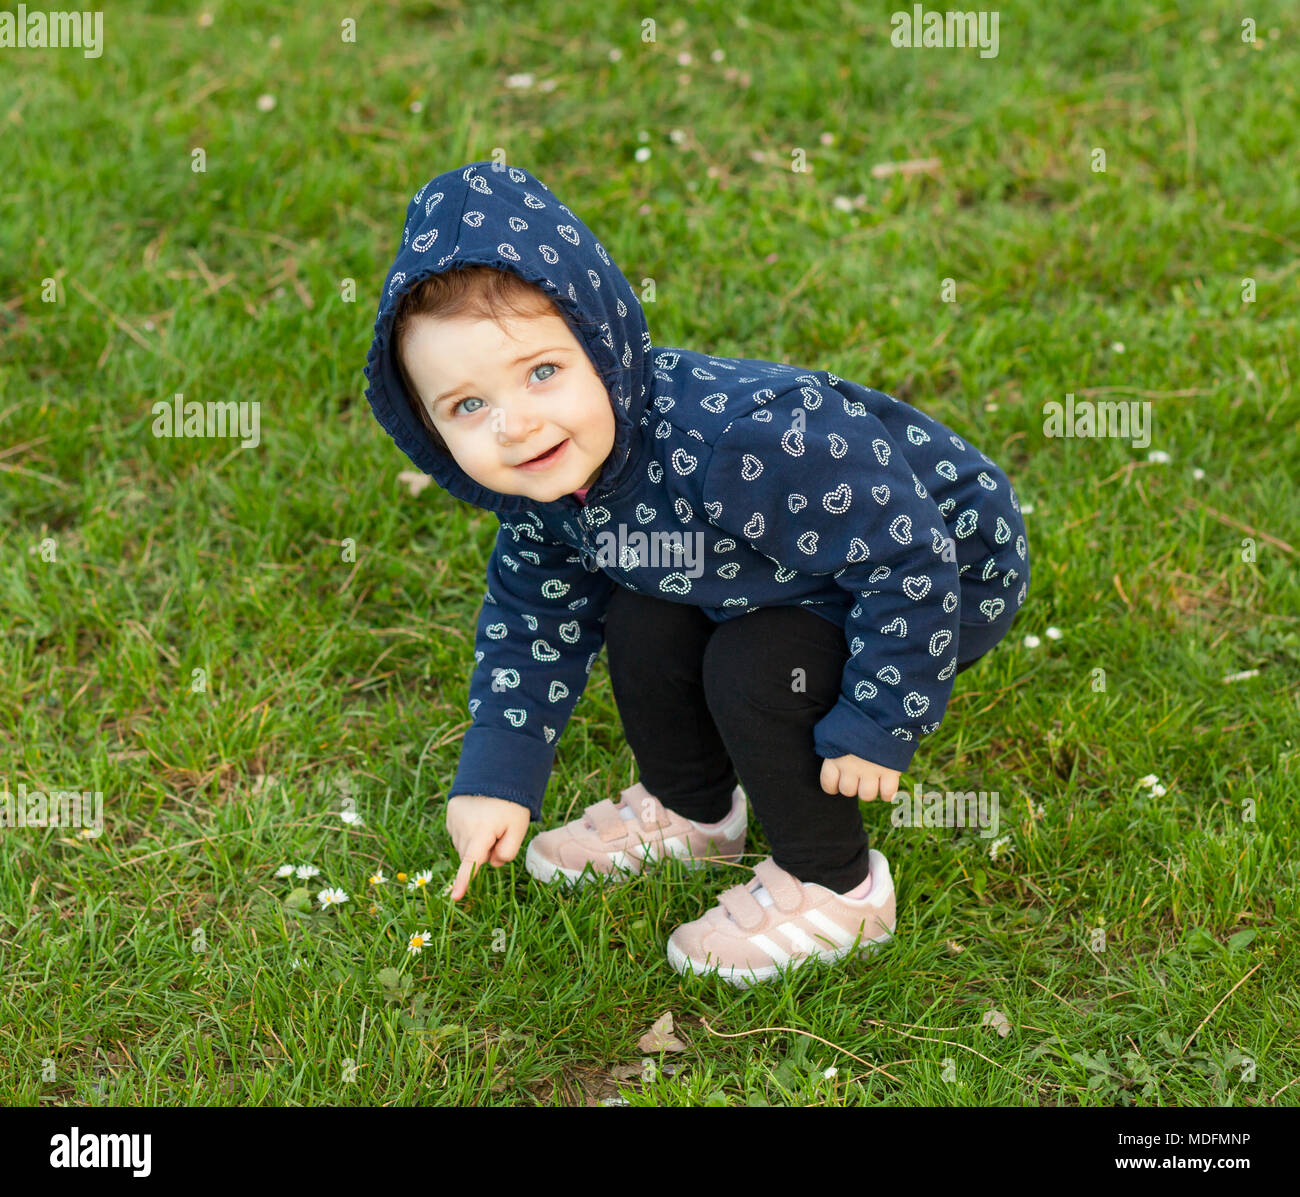 Little baby girl plays happy in the park outdoors in spring and collects daisies. Stock Photo